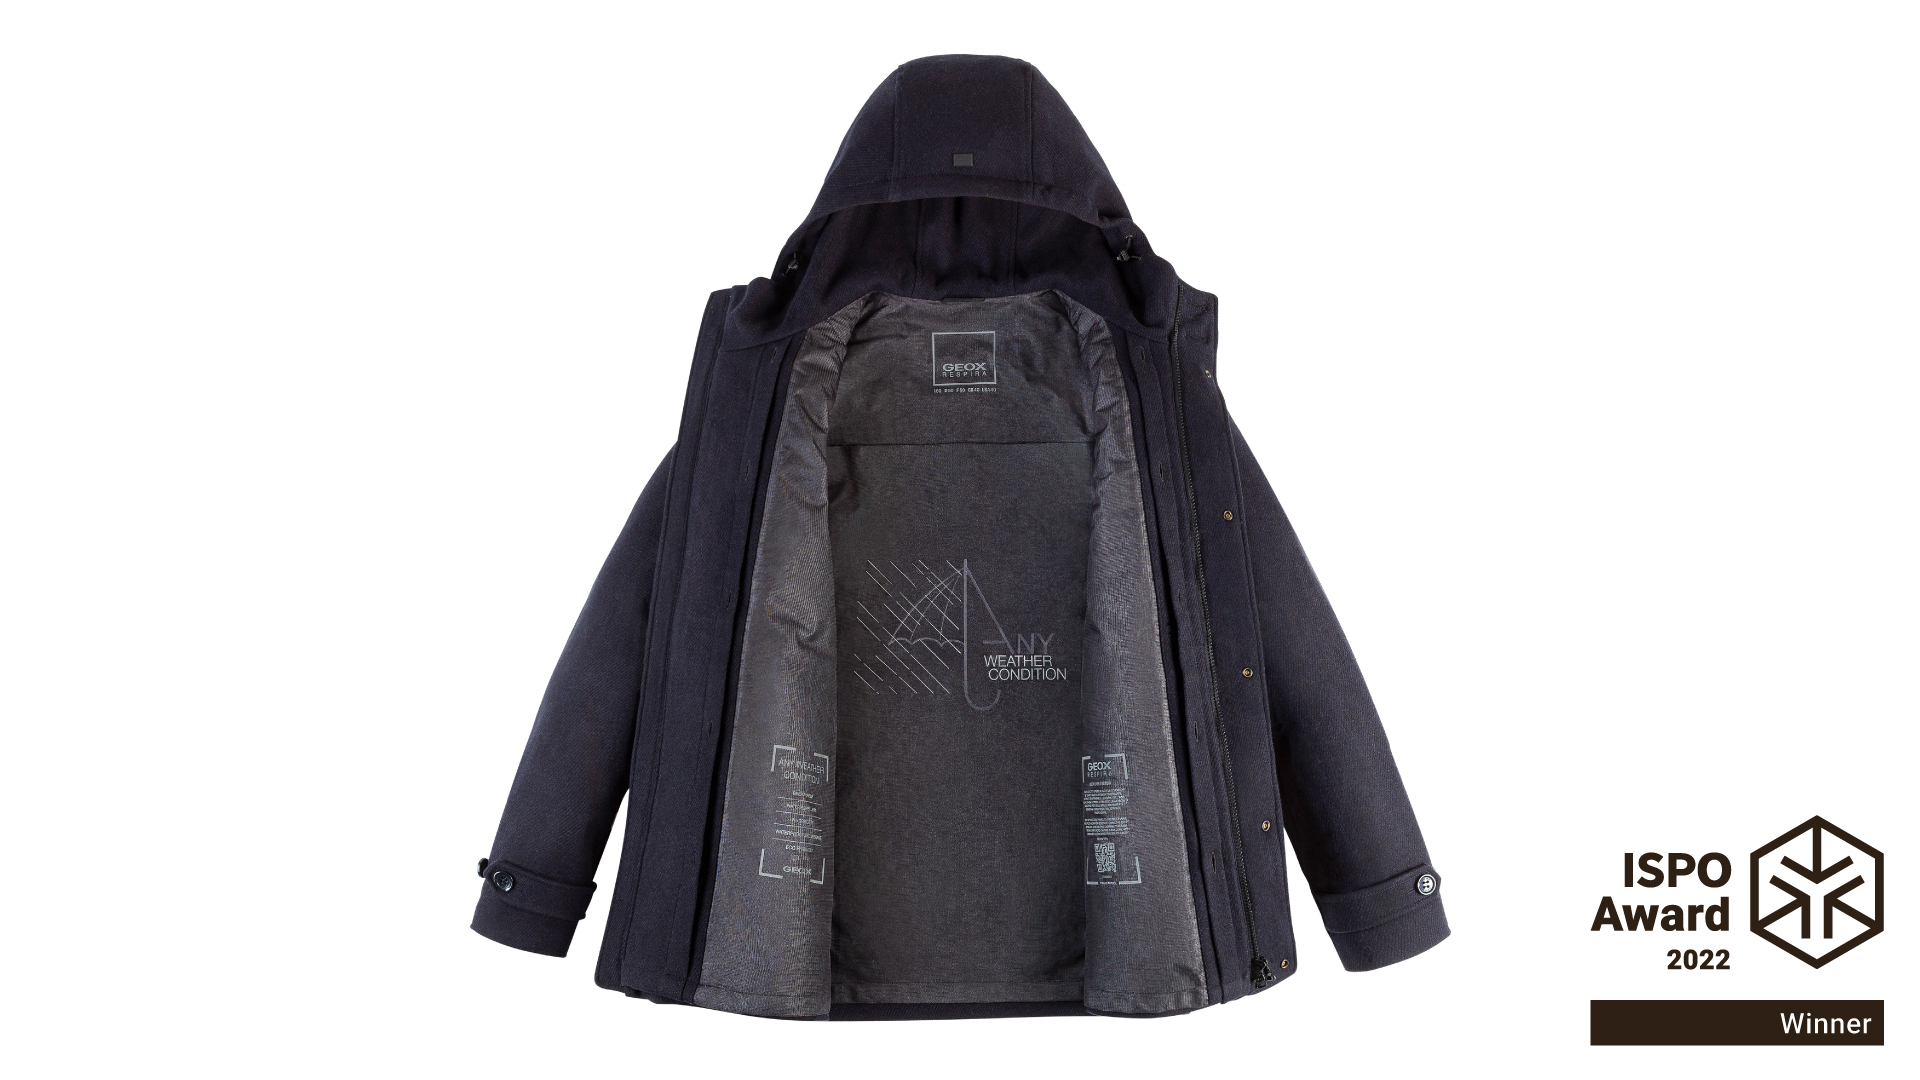 El cuarto Catedral Goneryl Geox's new Any Weather Condition Parka wins ISPO Award 2022